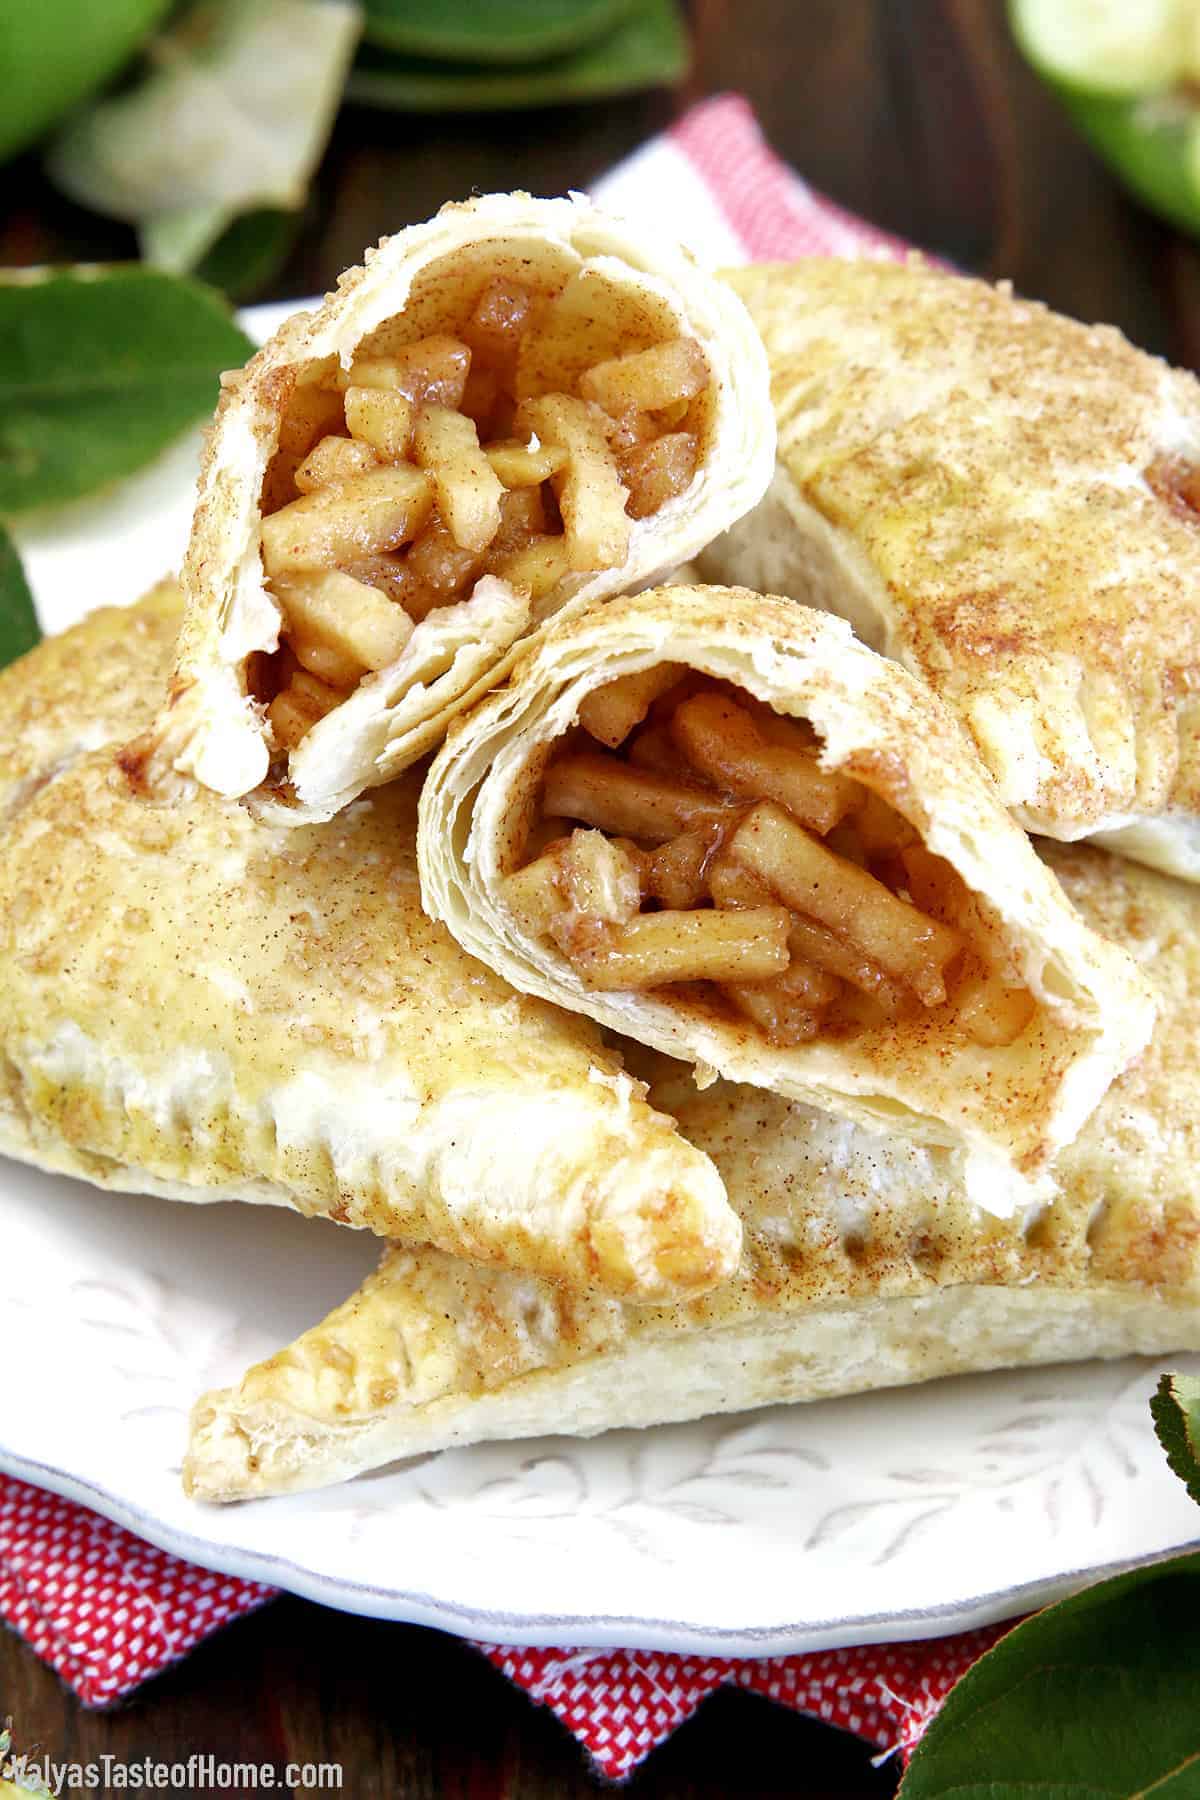 They're a portable dish, you could say, and are almost like a hand pie. Since they can be filled with sweet or savory fillings, they are incredibly versatile treats that you can make for just about any occasion. 